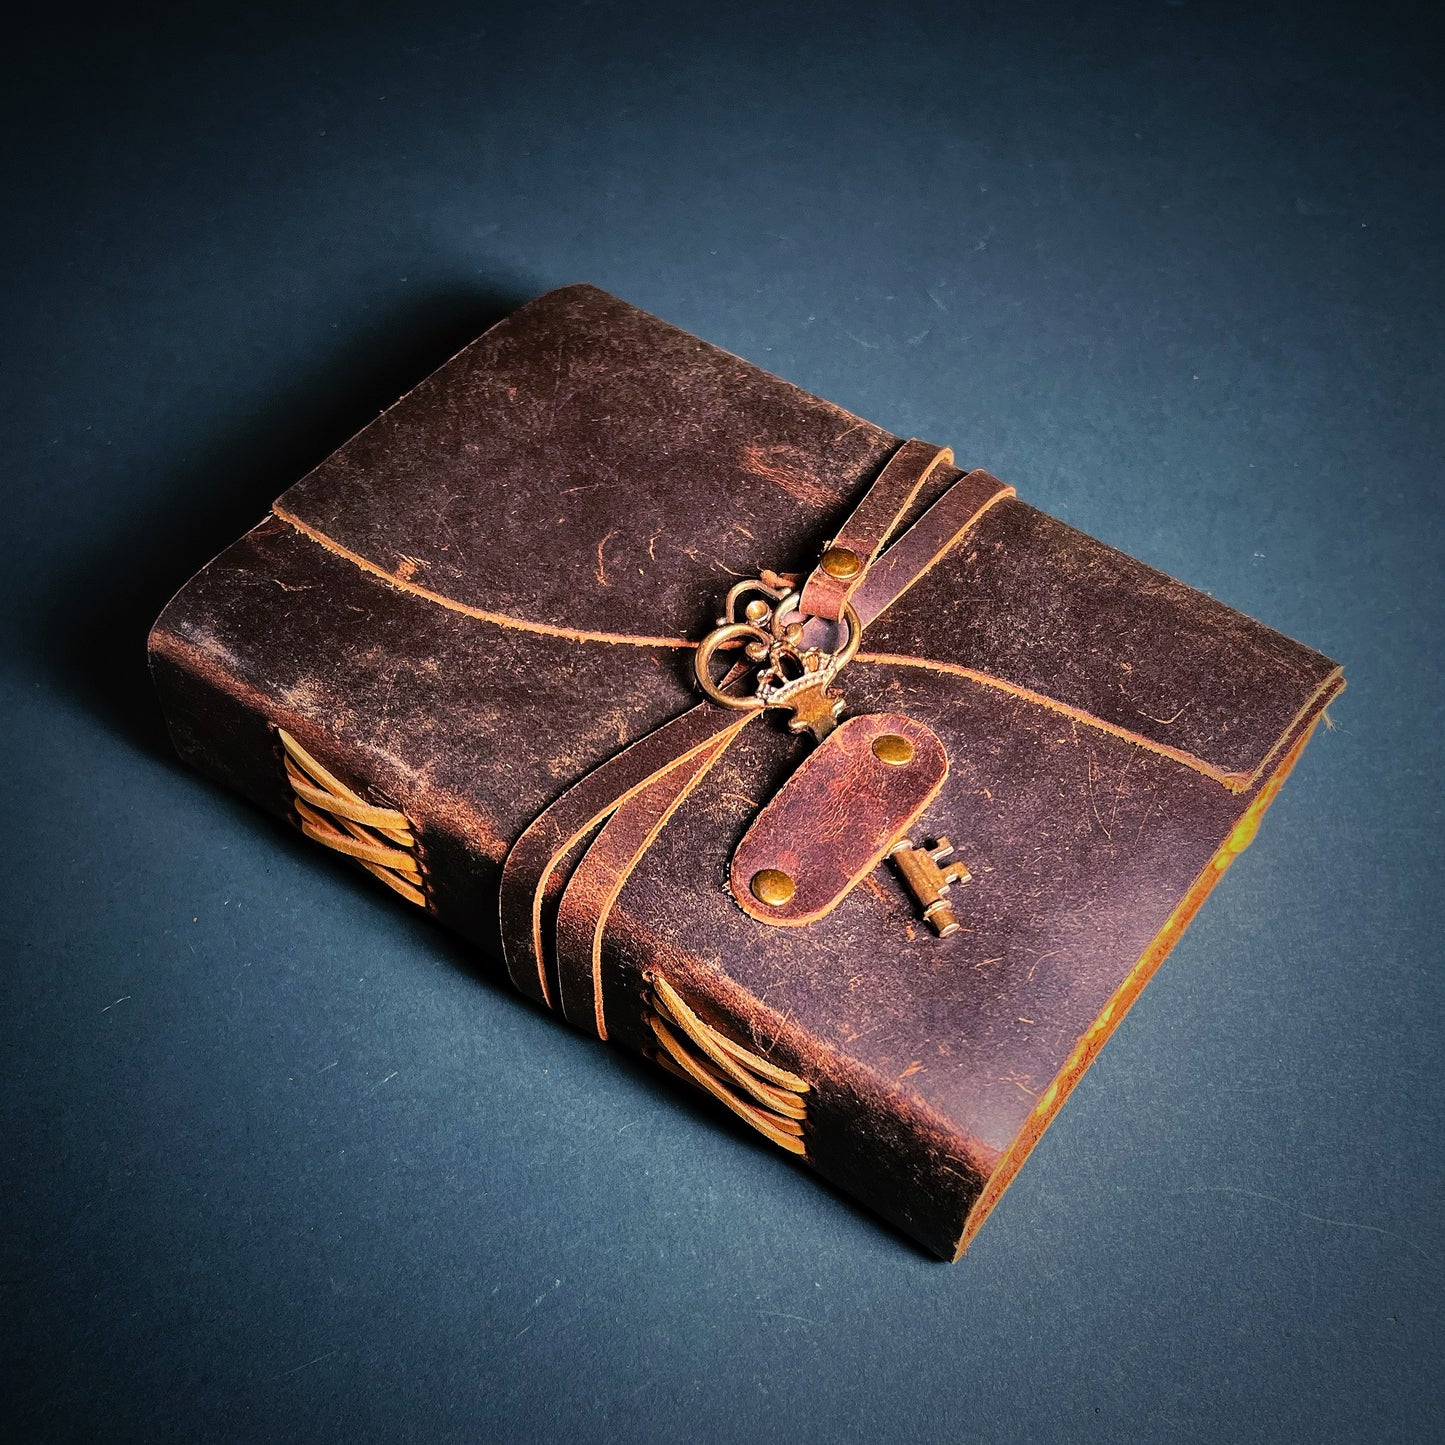 Old-fashioned notebook with brown leather covers and a locket